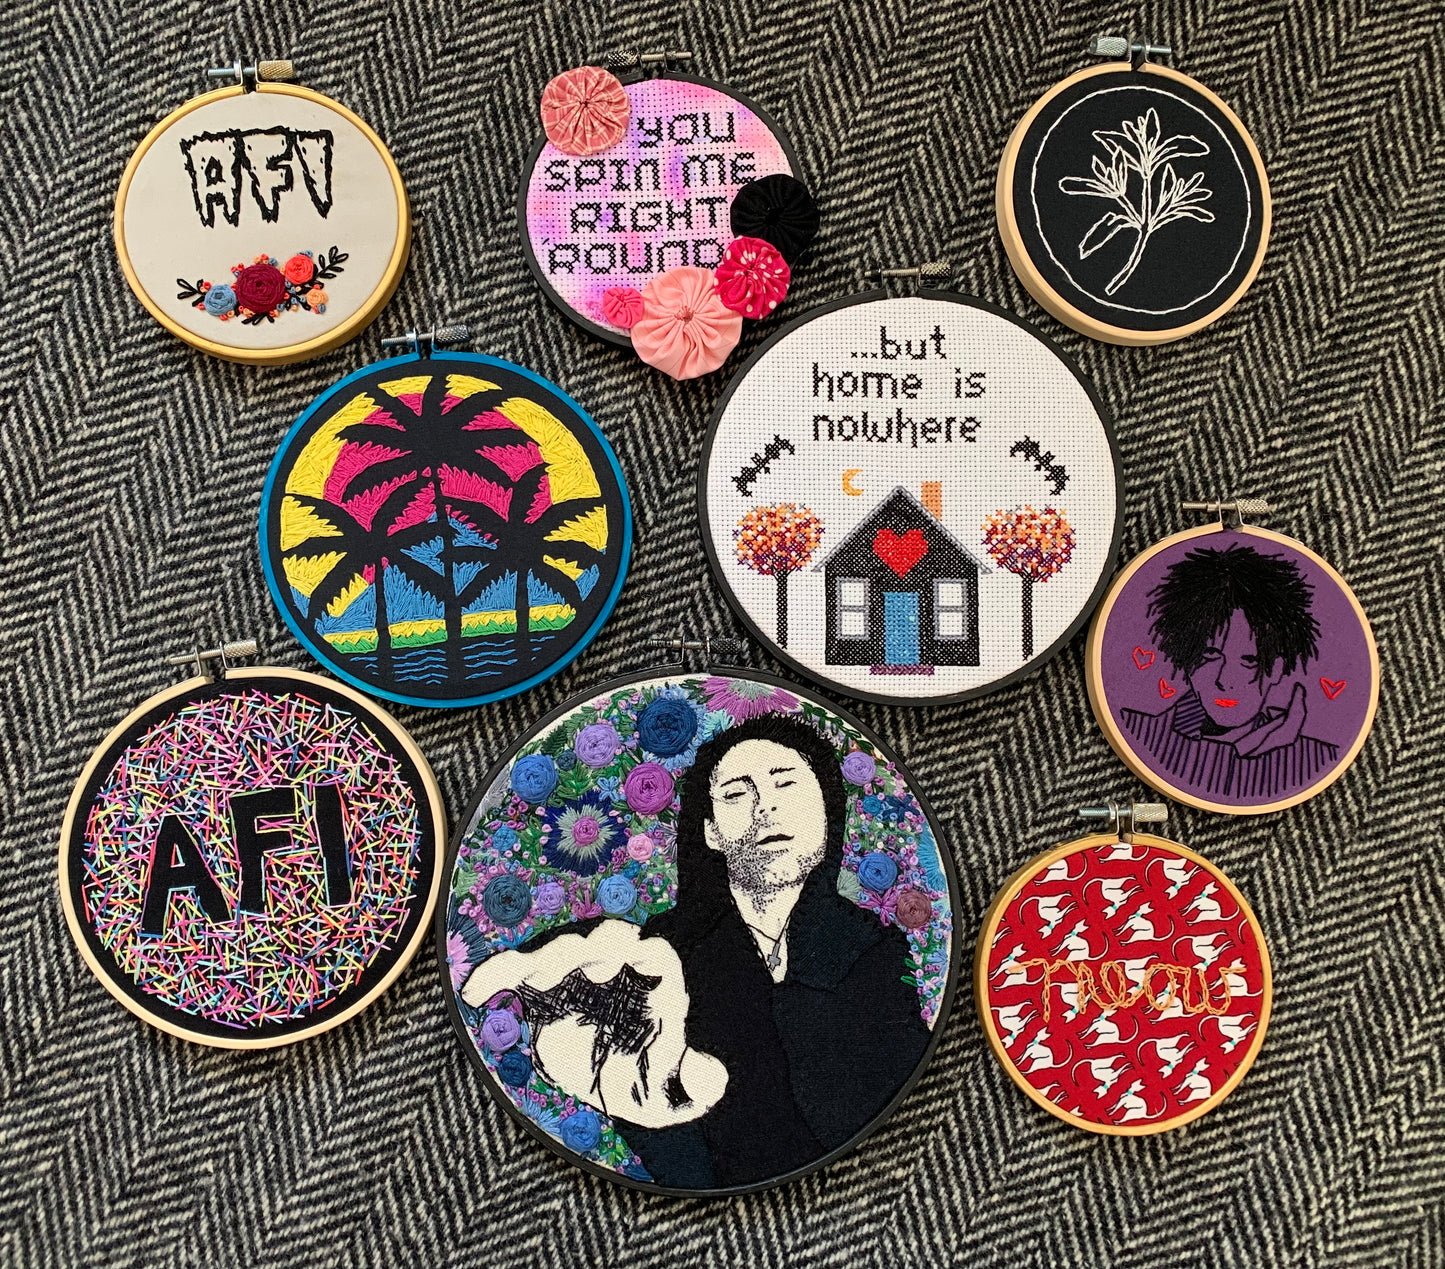 a group of embroidery hoops, many of which are still available